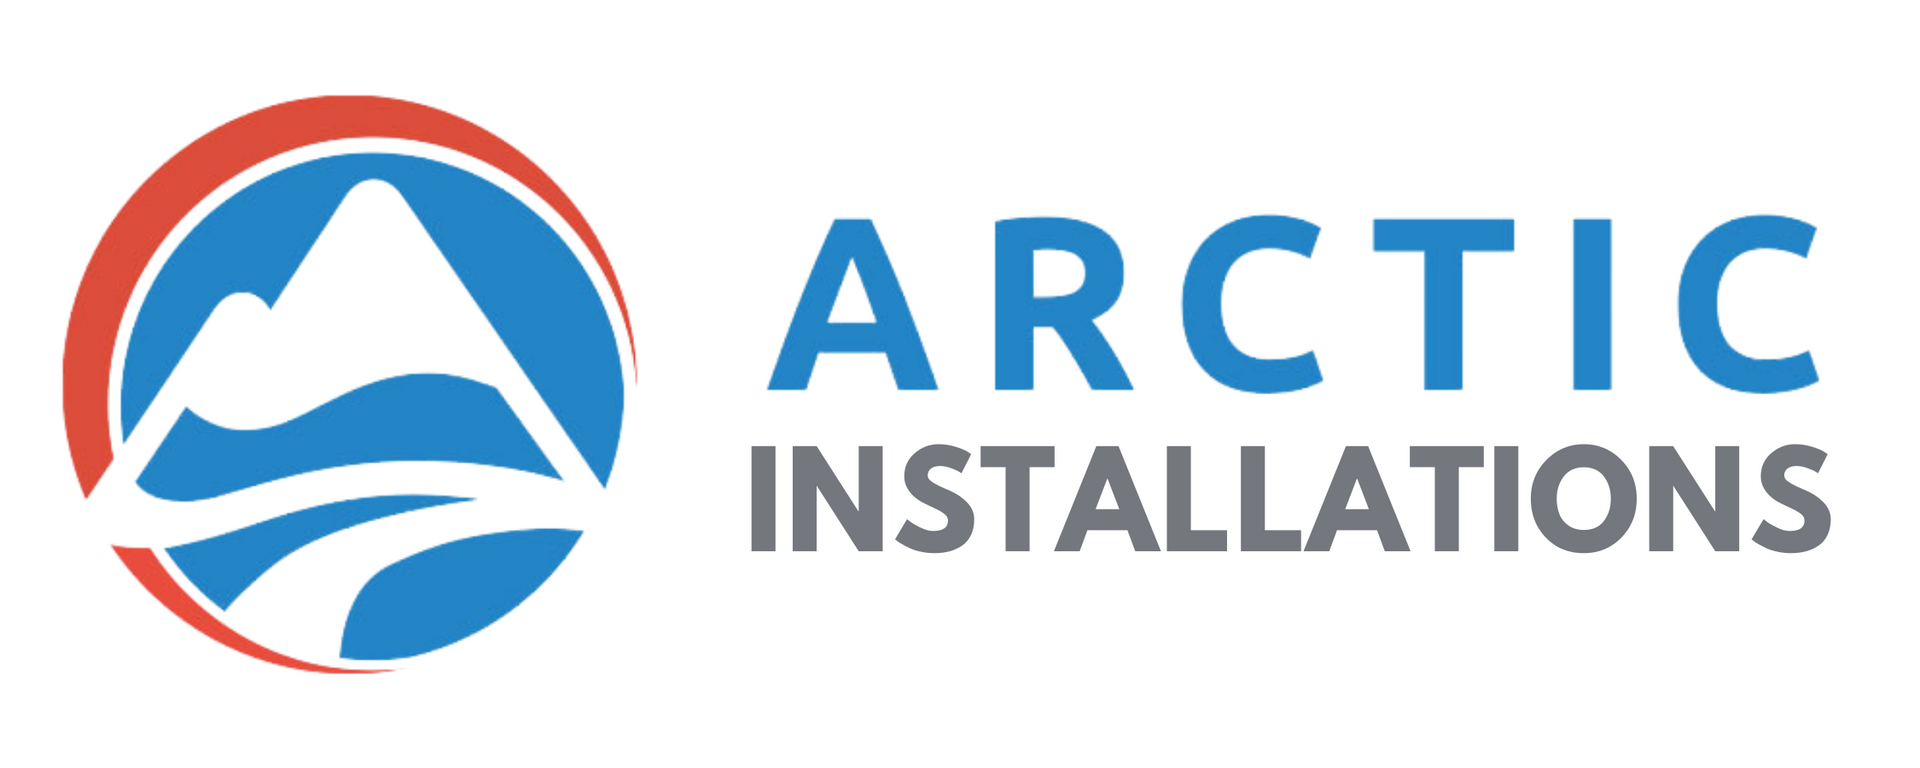 Arctic Installations: Insulation & Fire Resistant Panels in Darwin